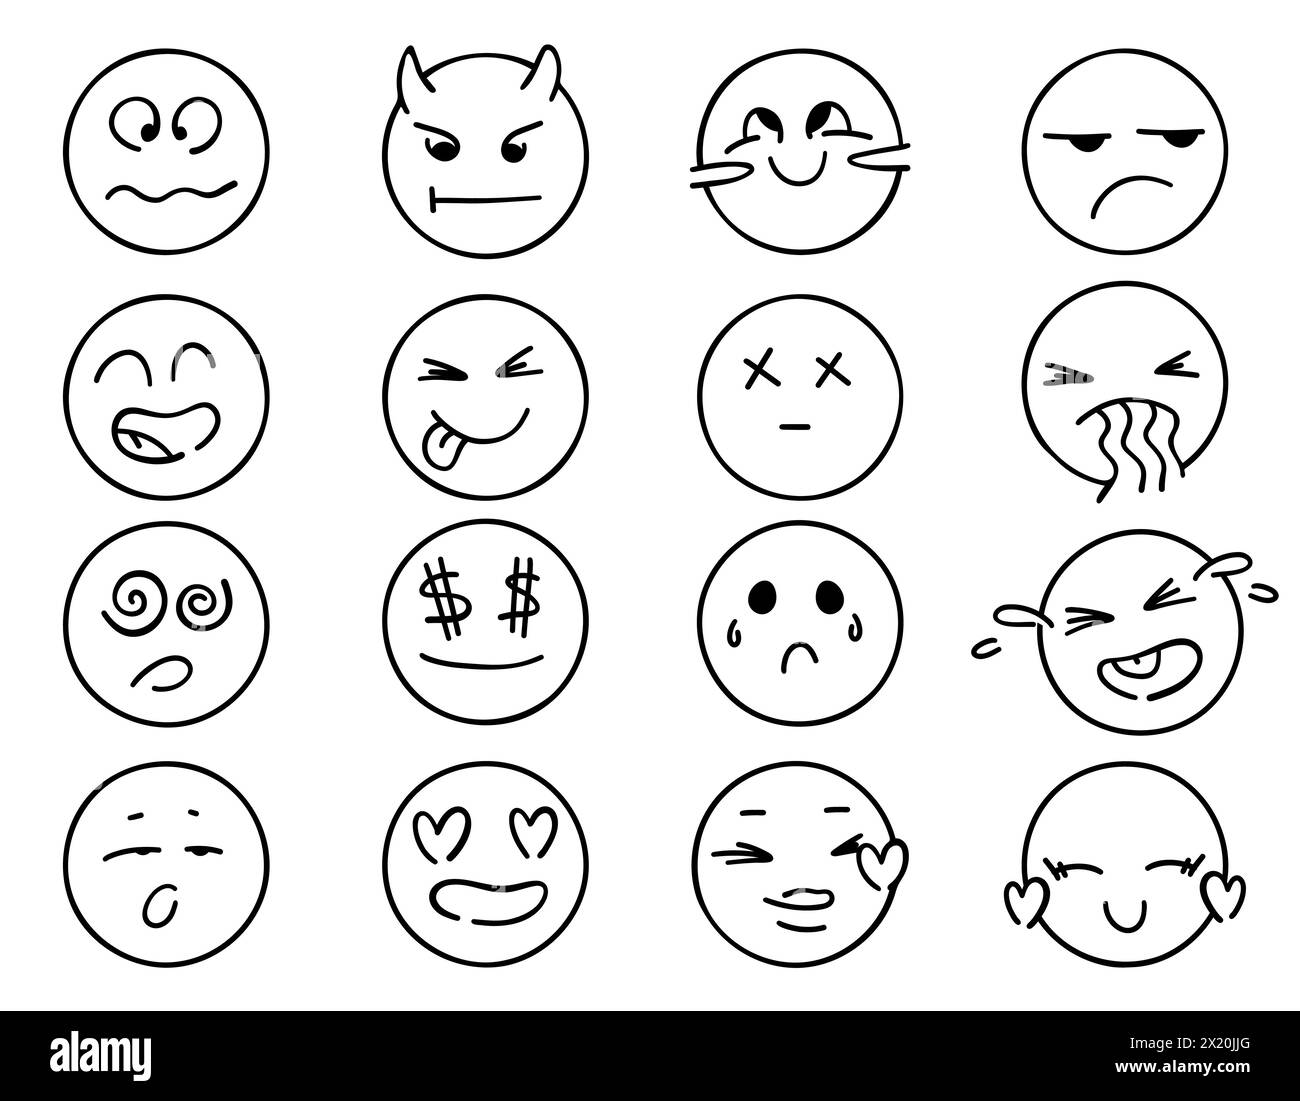 Doodle emotion emoji set. Doodle of cute emotions on a white background. Vector illustration. A pack of different emoticon expressions Stock Vector